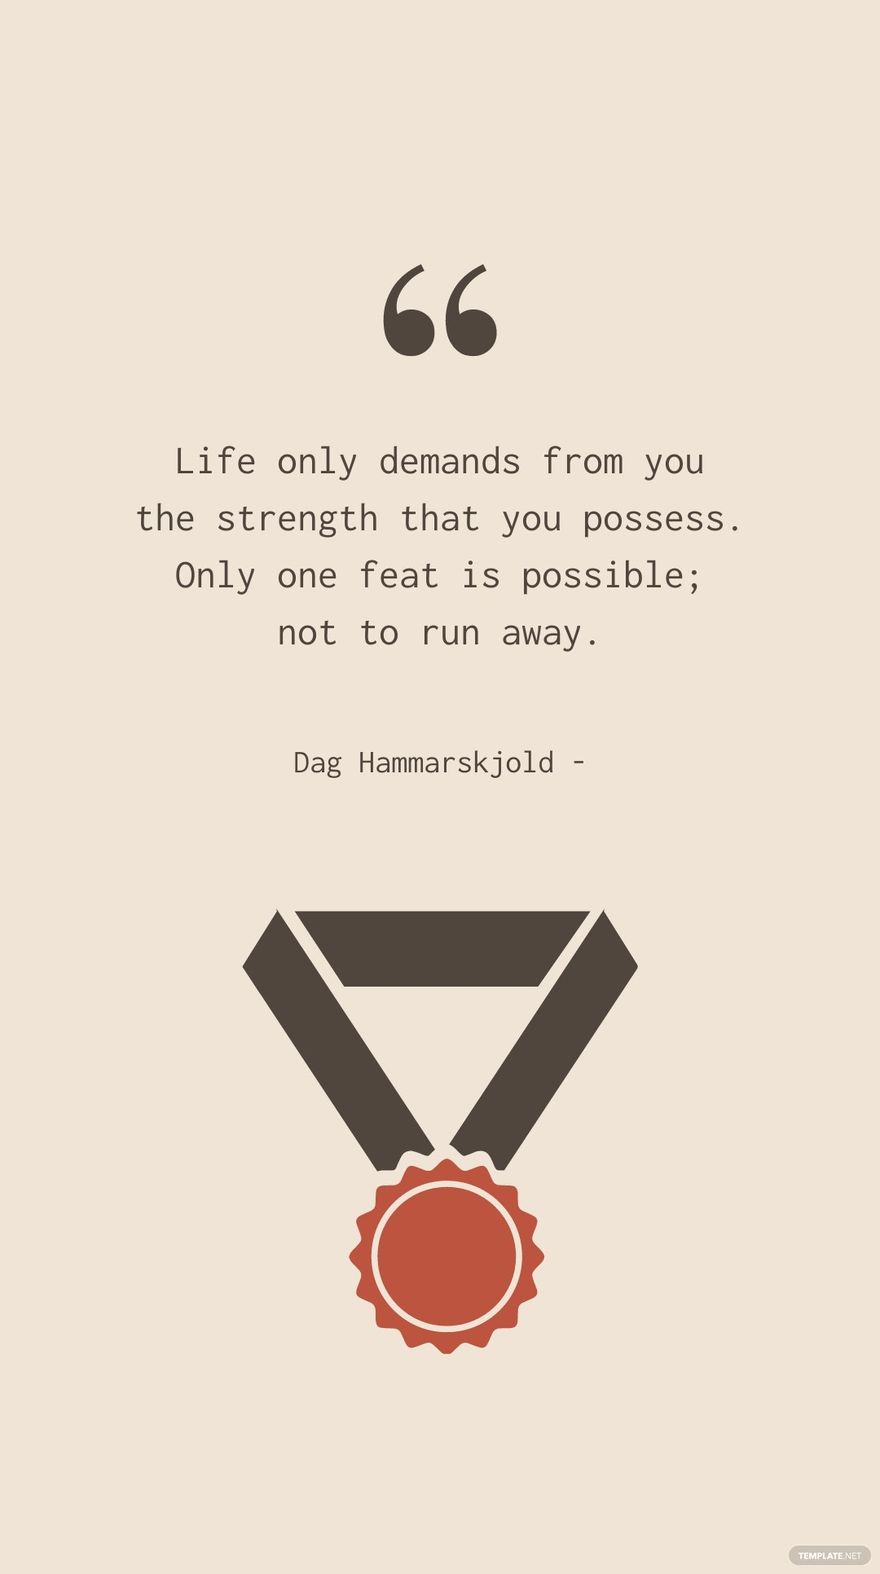 Dag Hammarskjold - Life only demands from you the strength that you possess. Only one feat is possible; not to run away.